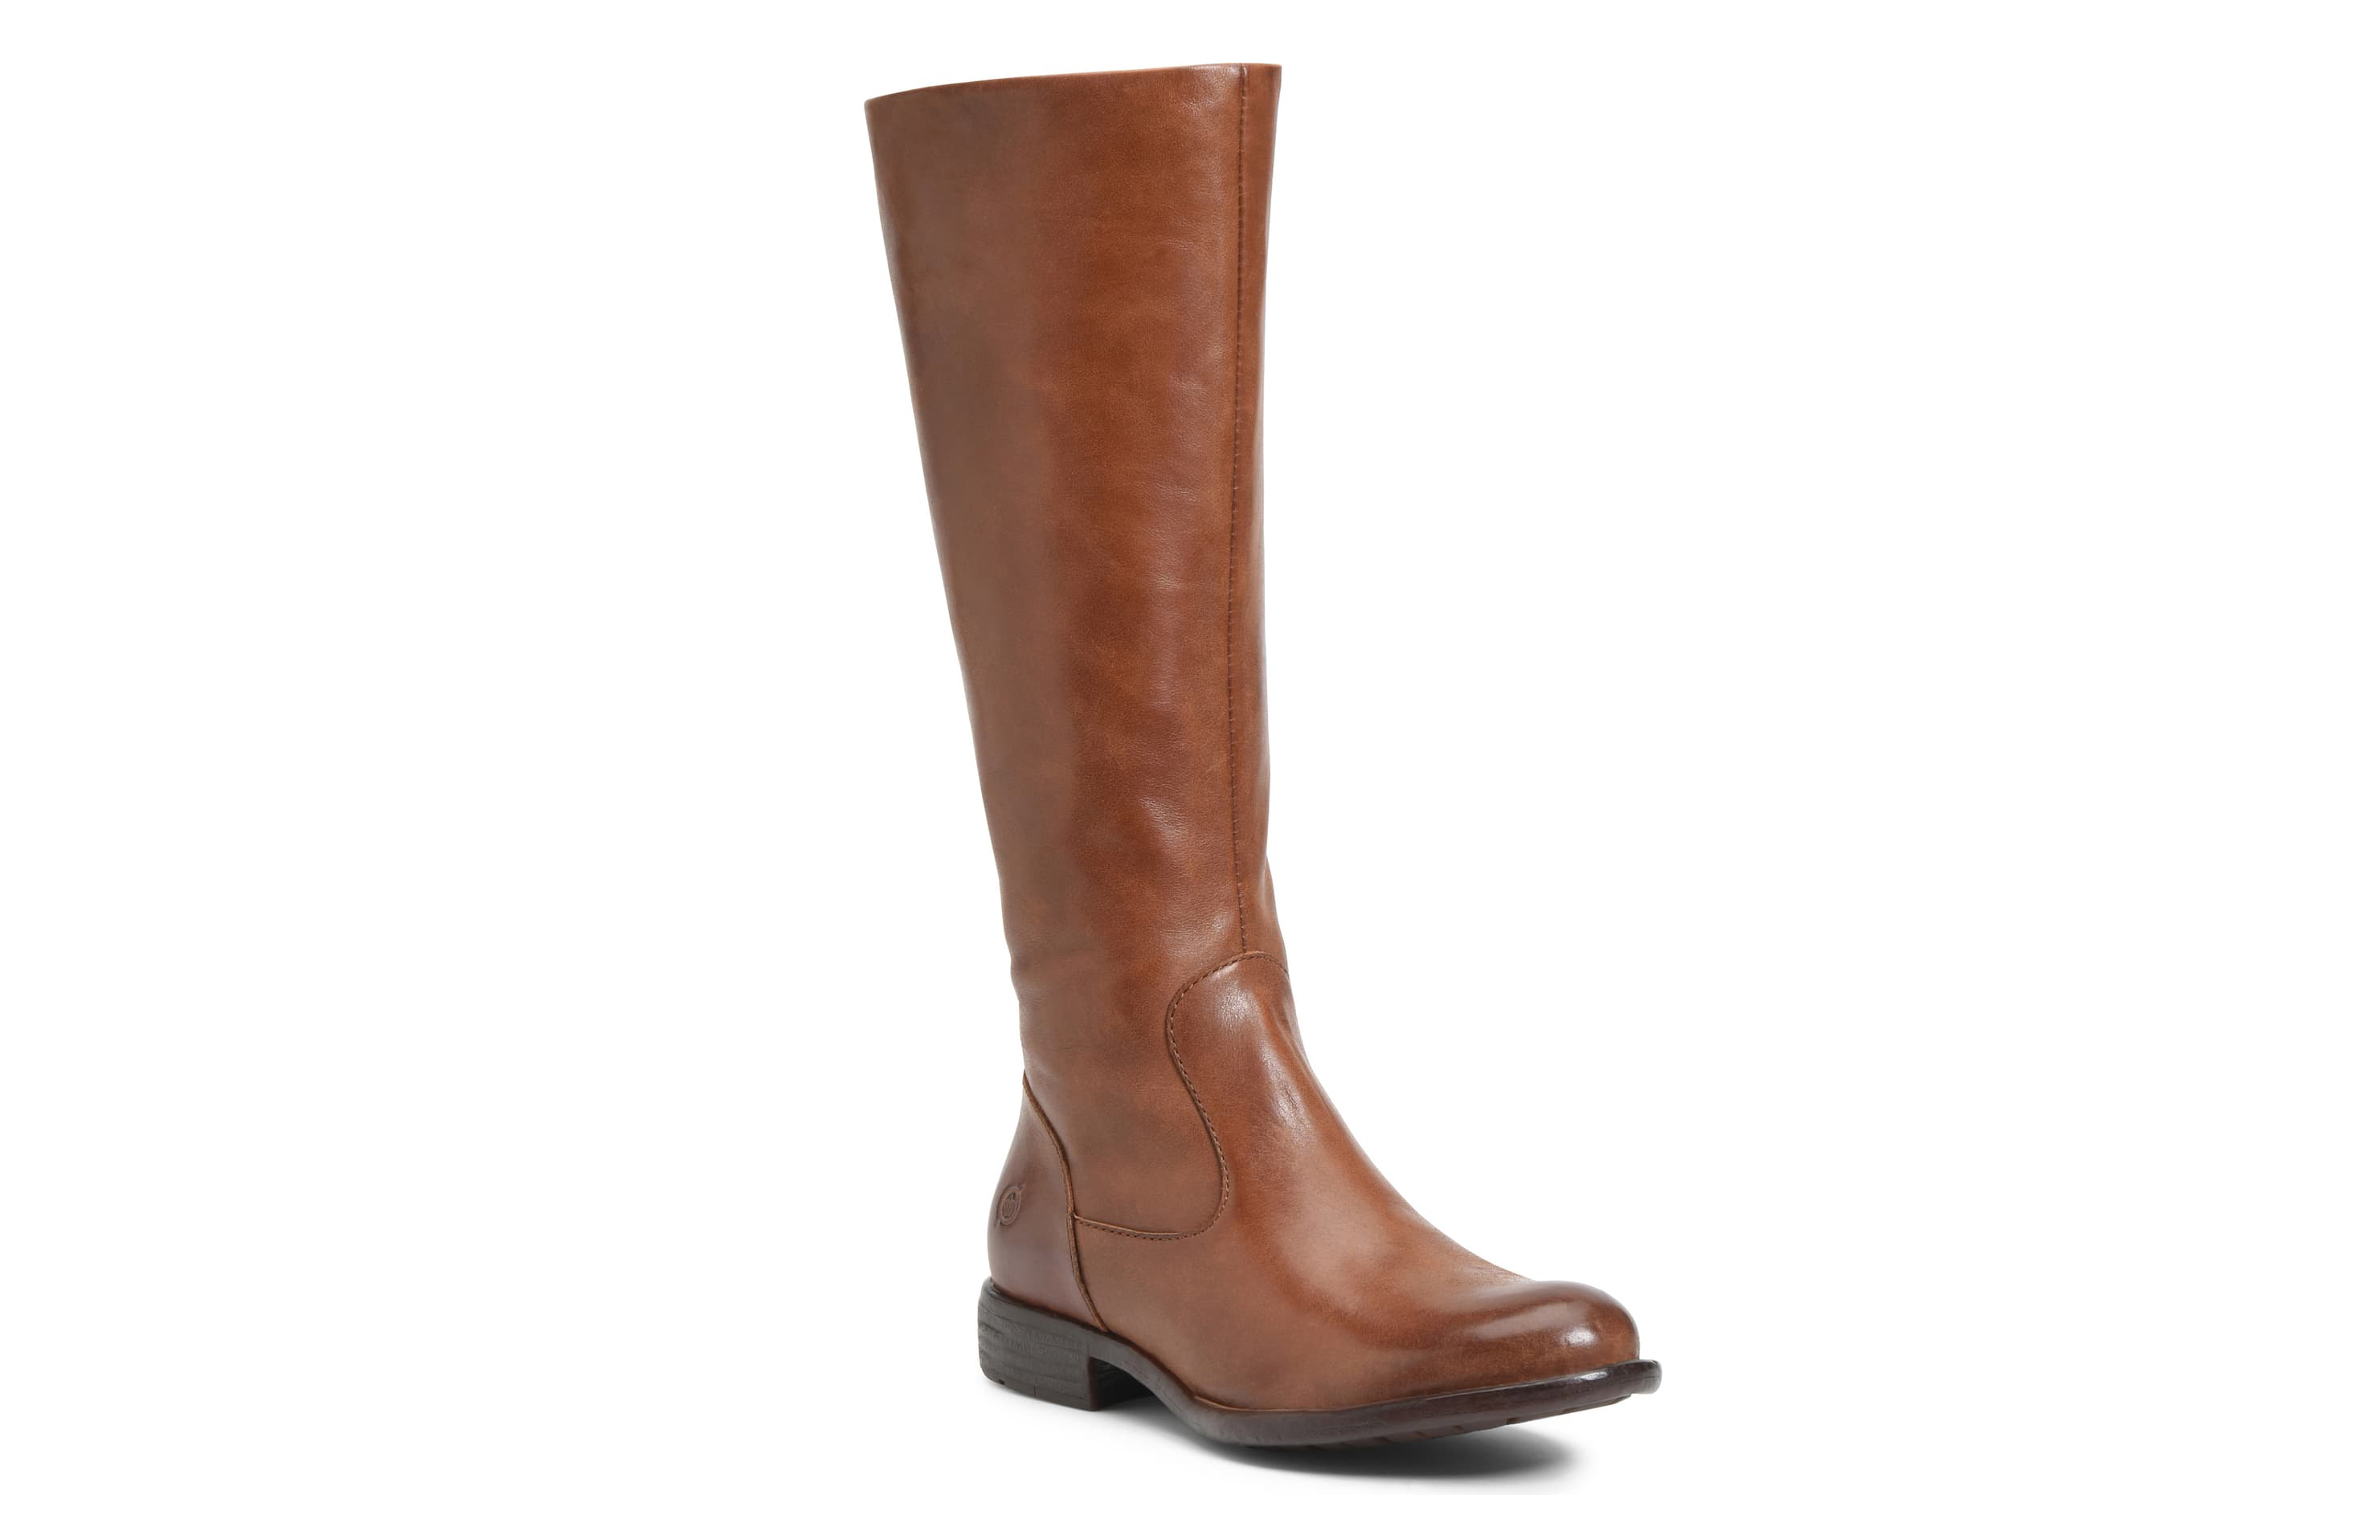 Born Leather Riding Boots Are Stunning and 50% Off at Nordstrom